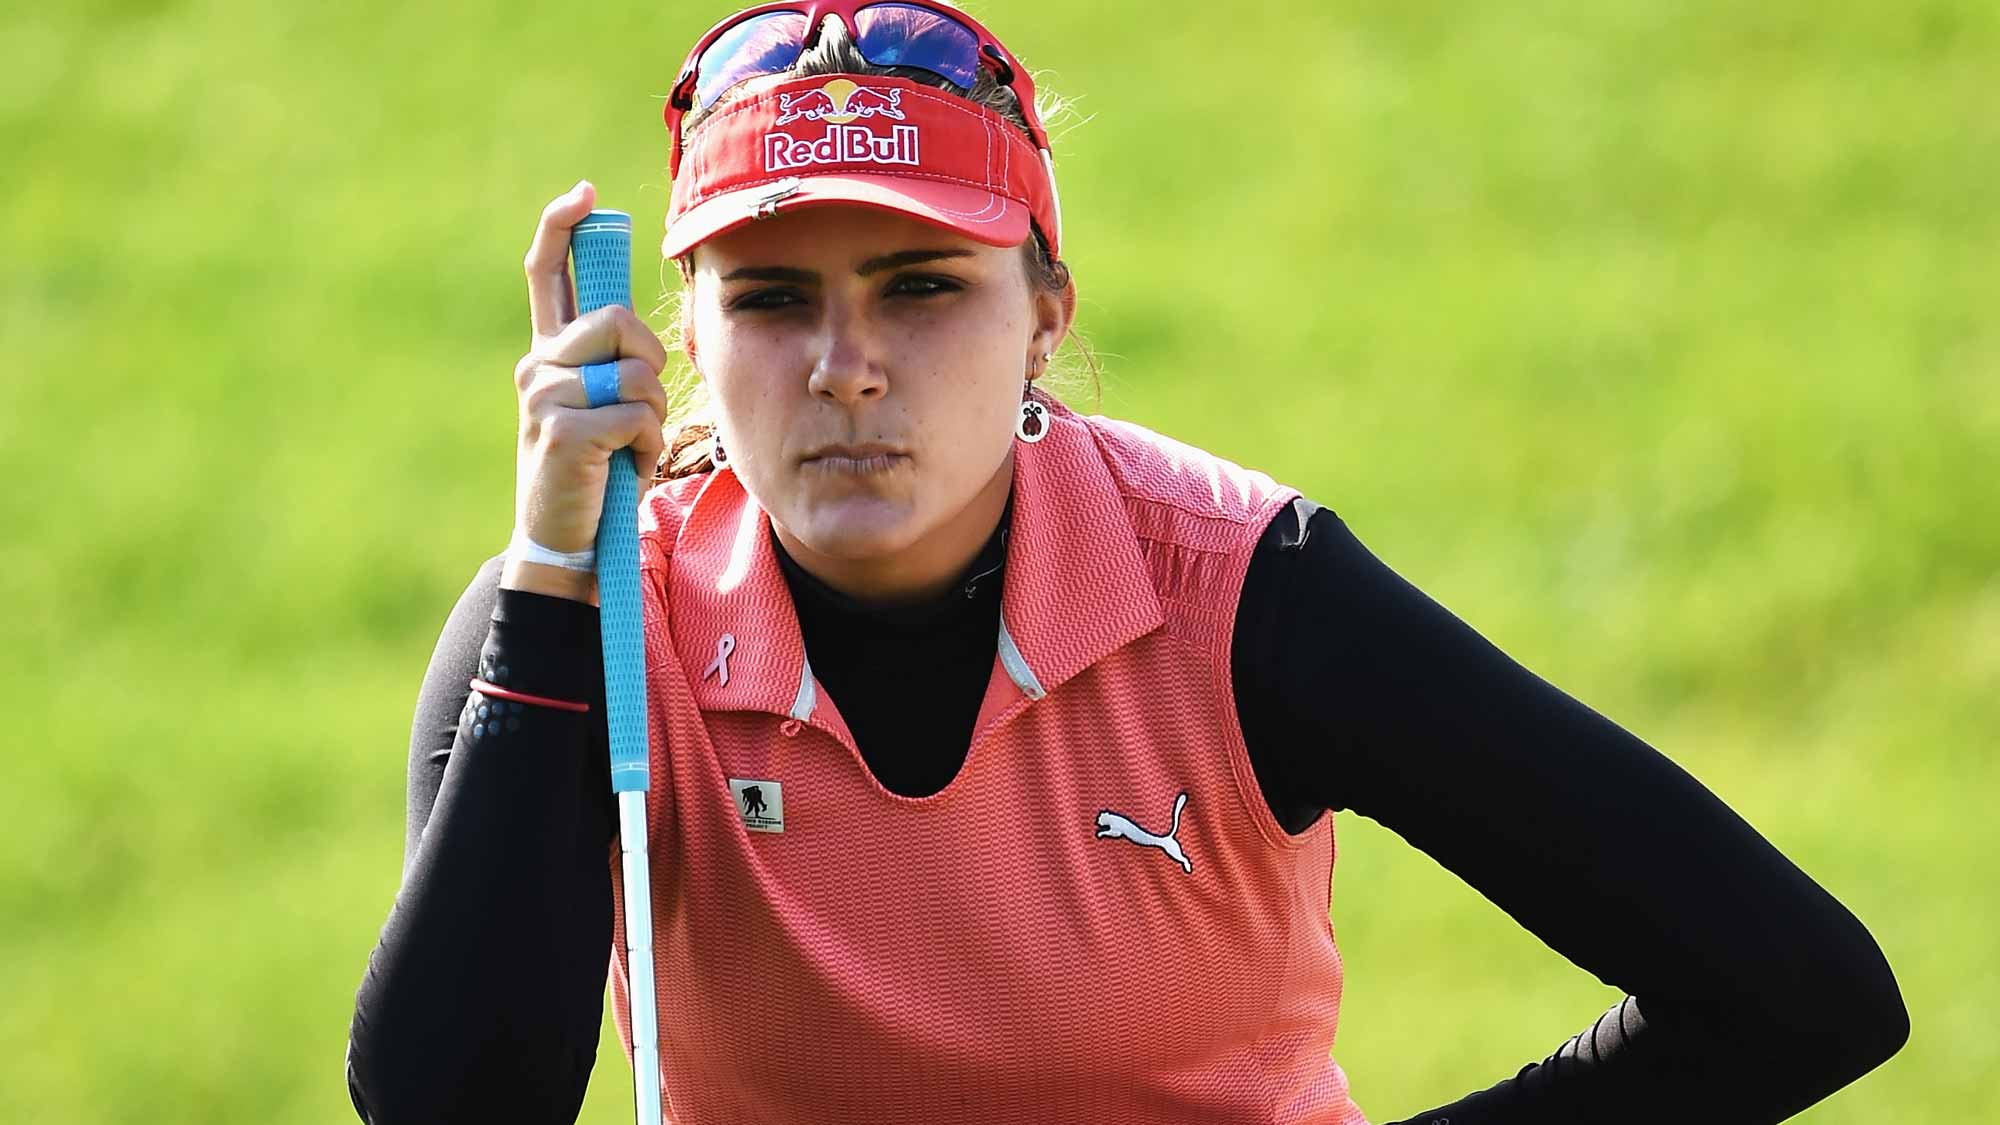 Lexi Thompson of USA lines up a putt during the first round of the Evian Championship Golf on September 10, 2015 in Evian-les-Bains, France